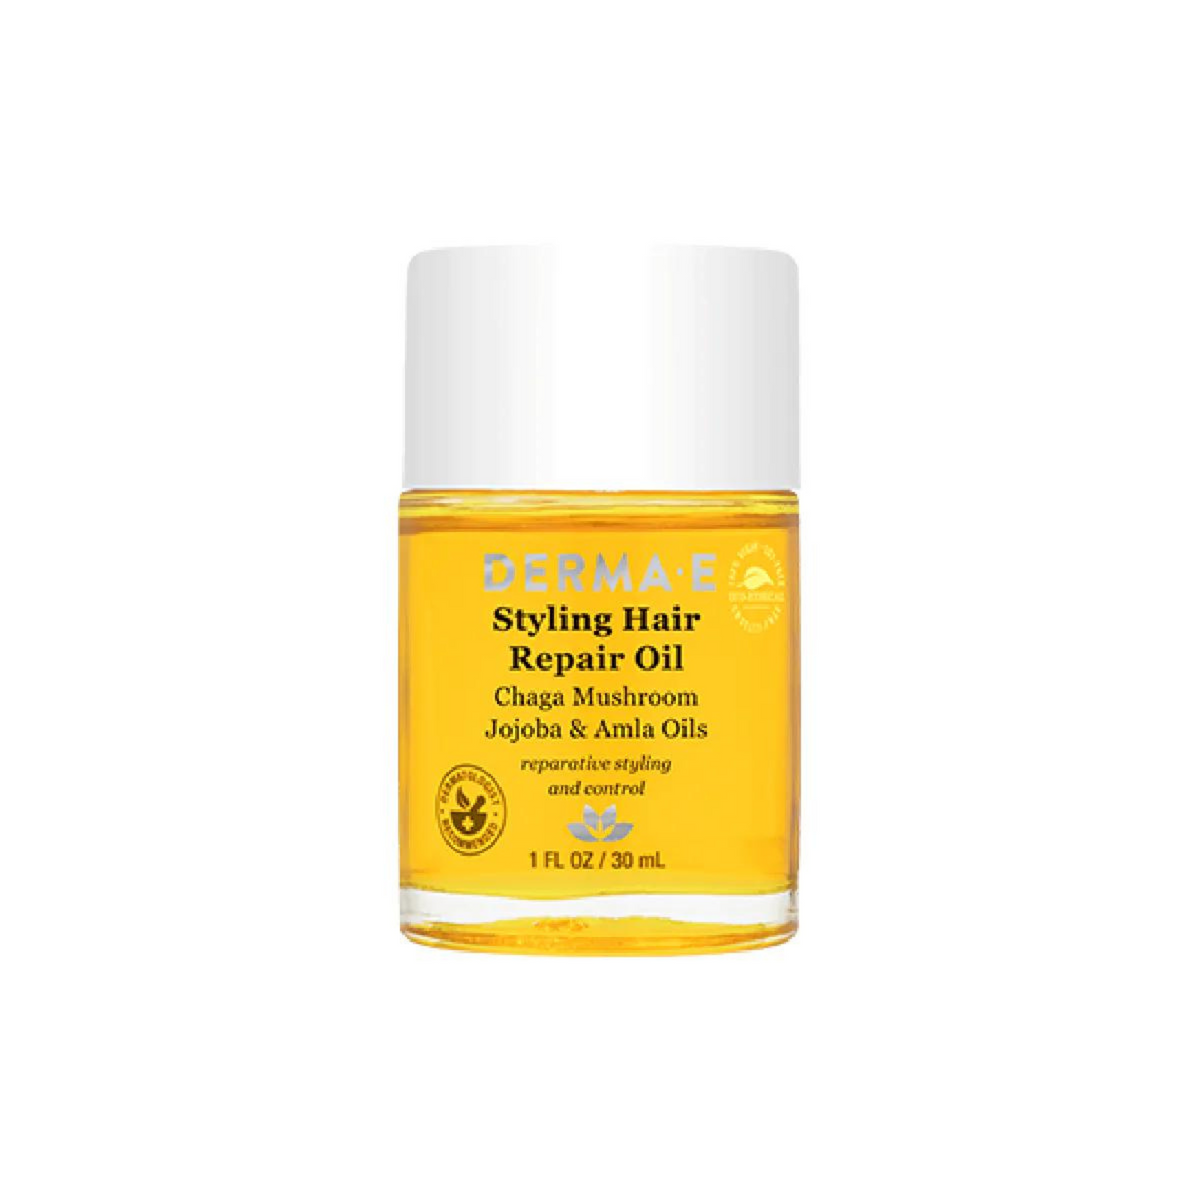 Primary Image of Styling Hair Oil